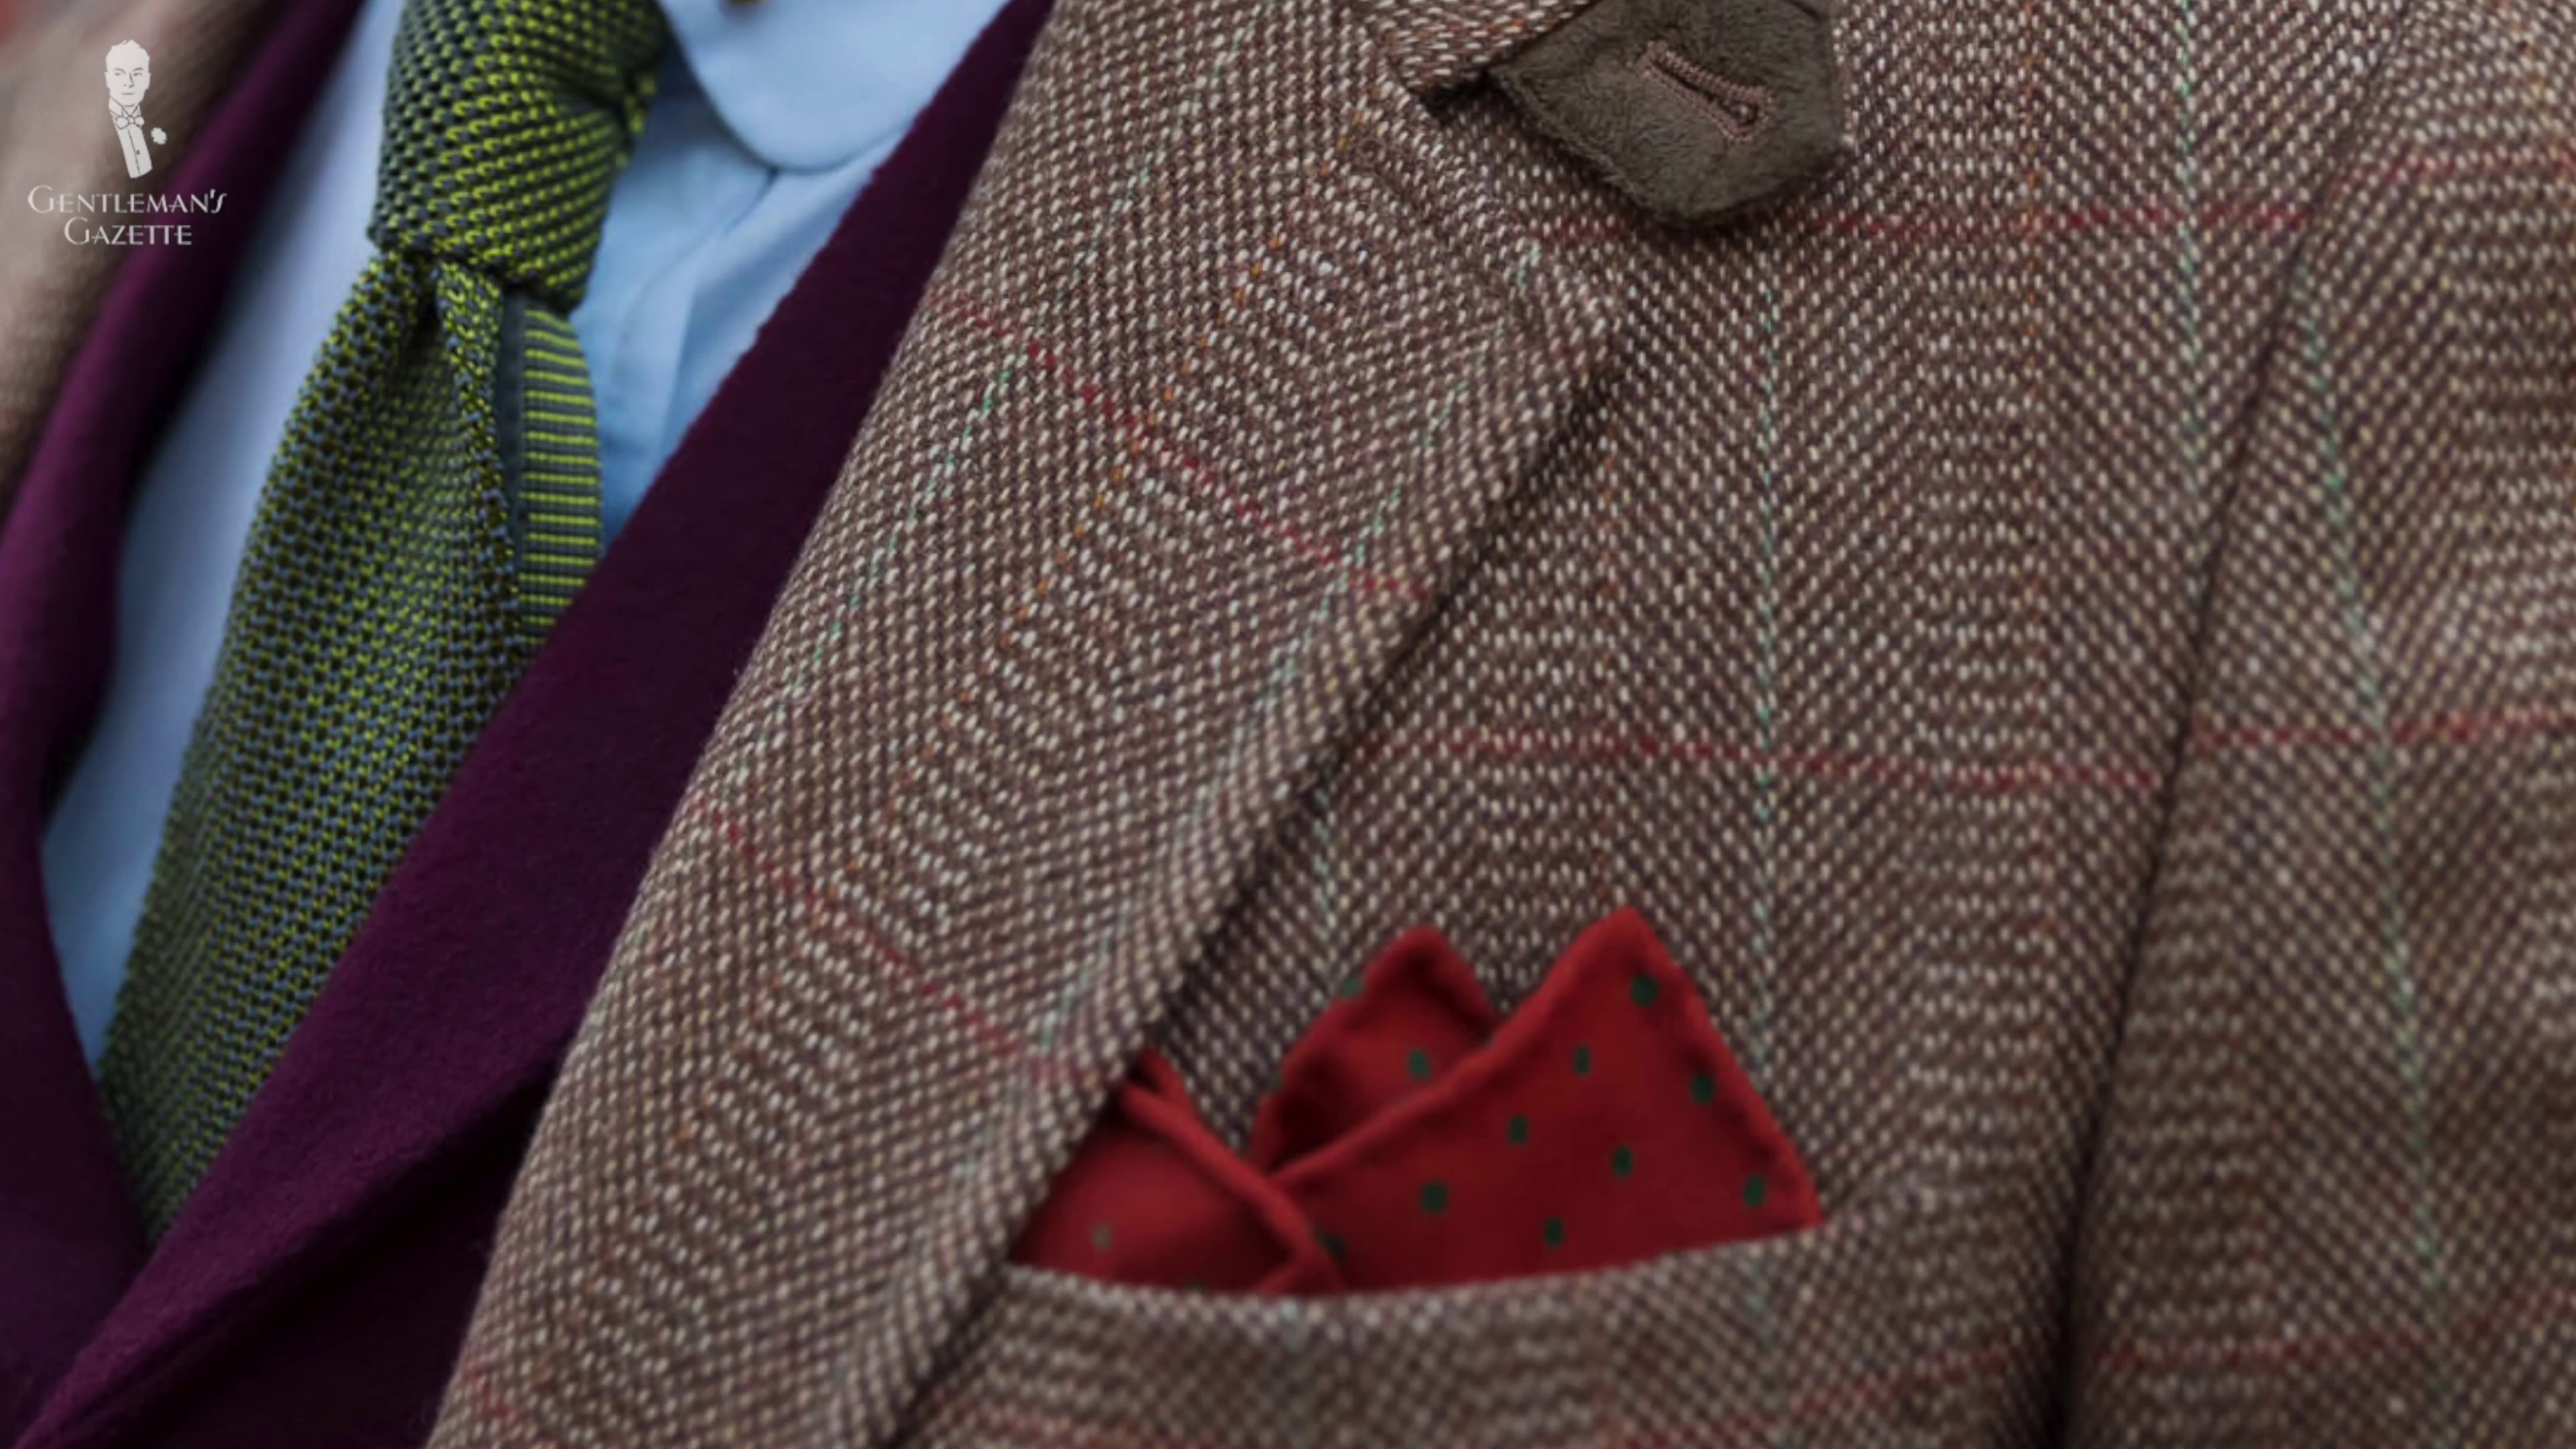 Polka-dotted pocket squares are going to work best with a solid tie.